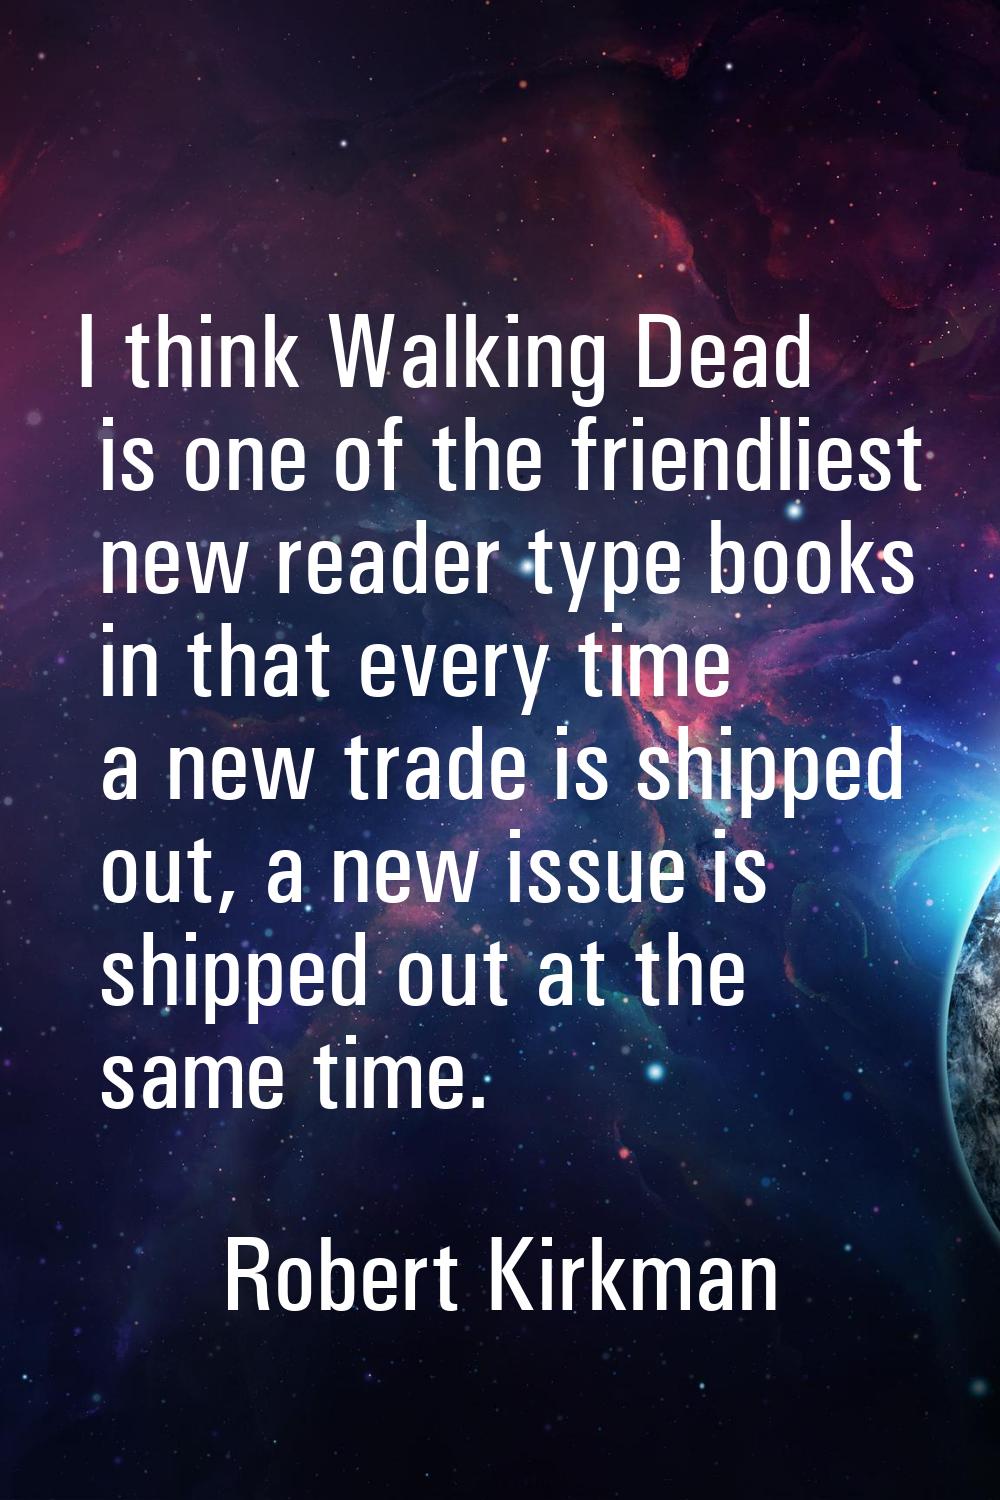 I think Walking Dead is one of the friendliest new reader type books in that every time a new trade